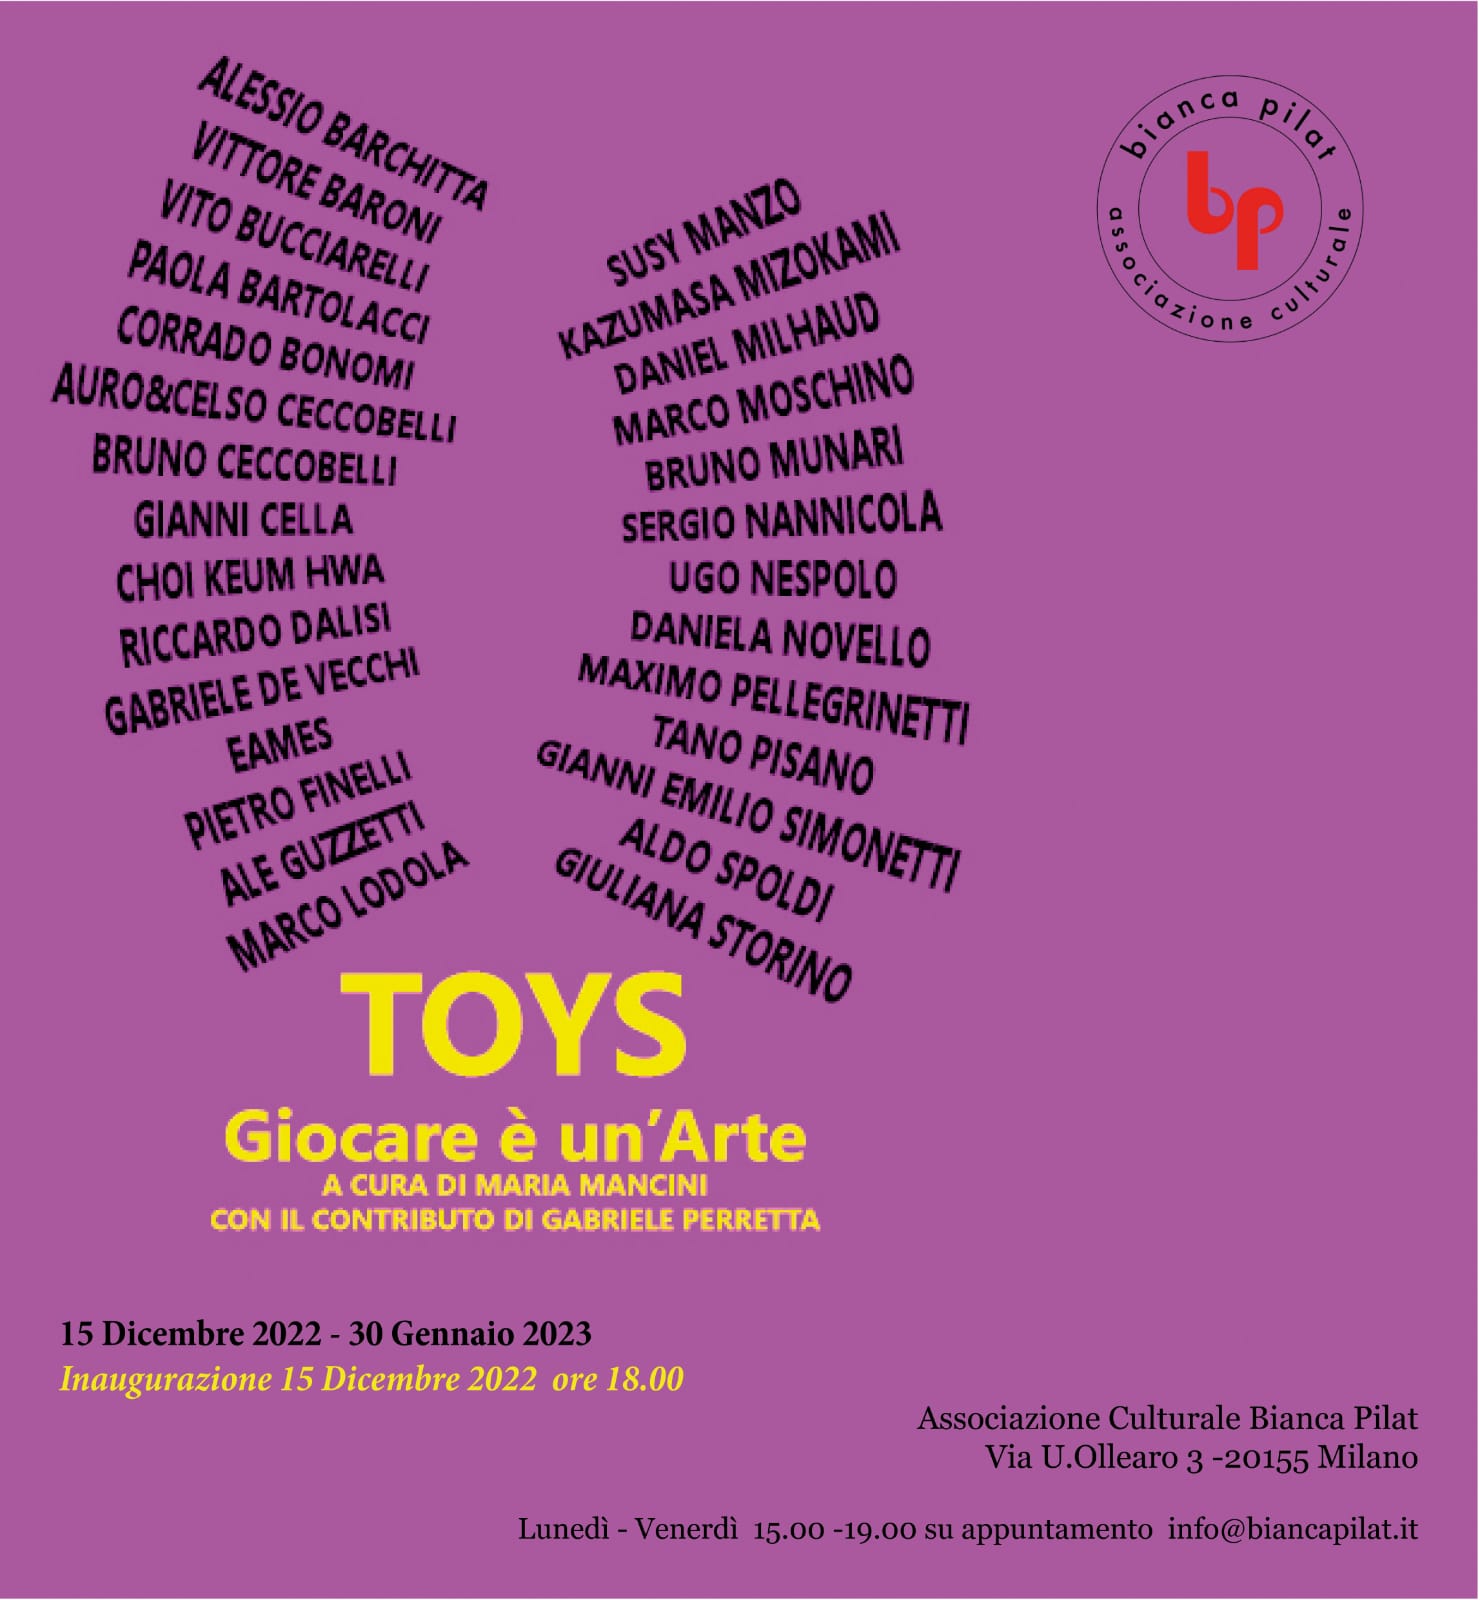 15/12/2022 the invitation of the exhibition Toys in associazione culturale Bianca Pilat